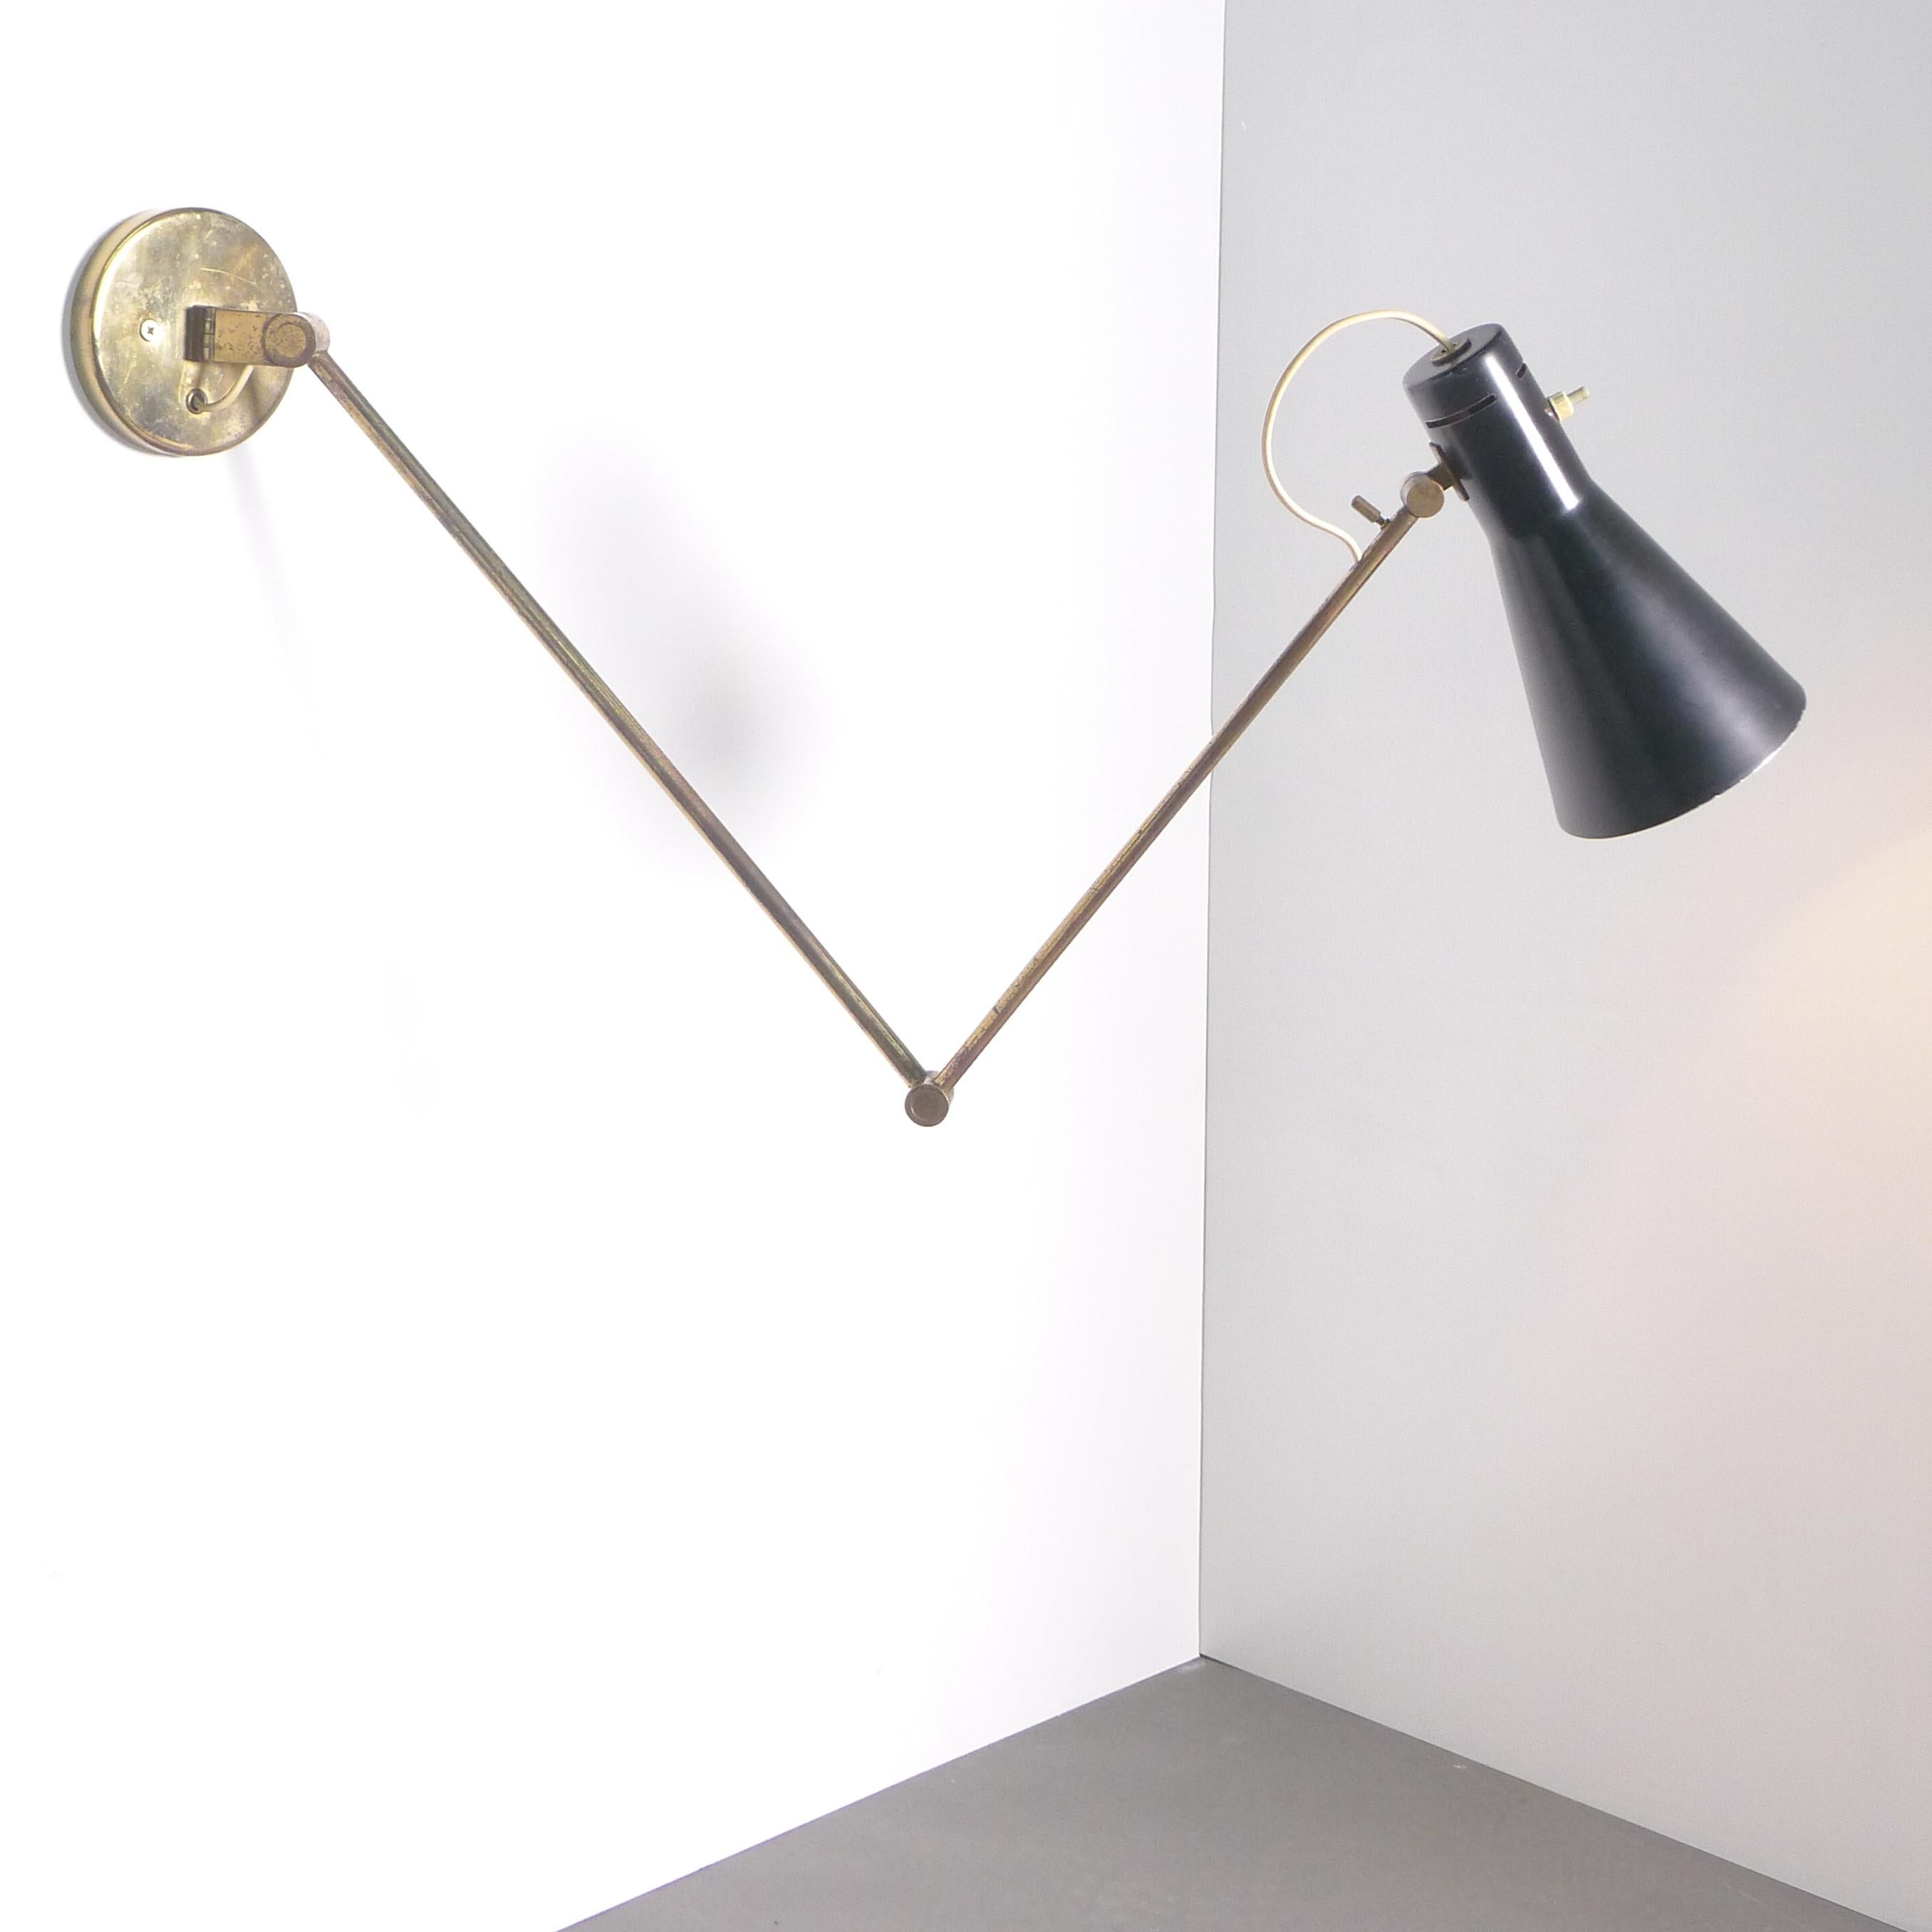 Vittoriano Vigano for Arteluce, Rare Articulated Wall Light, Italian 1950s For Sale 2